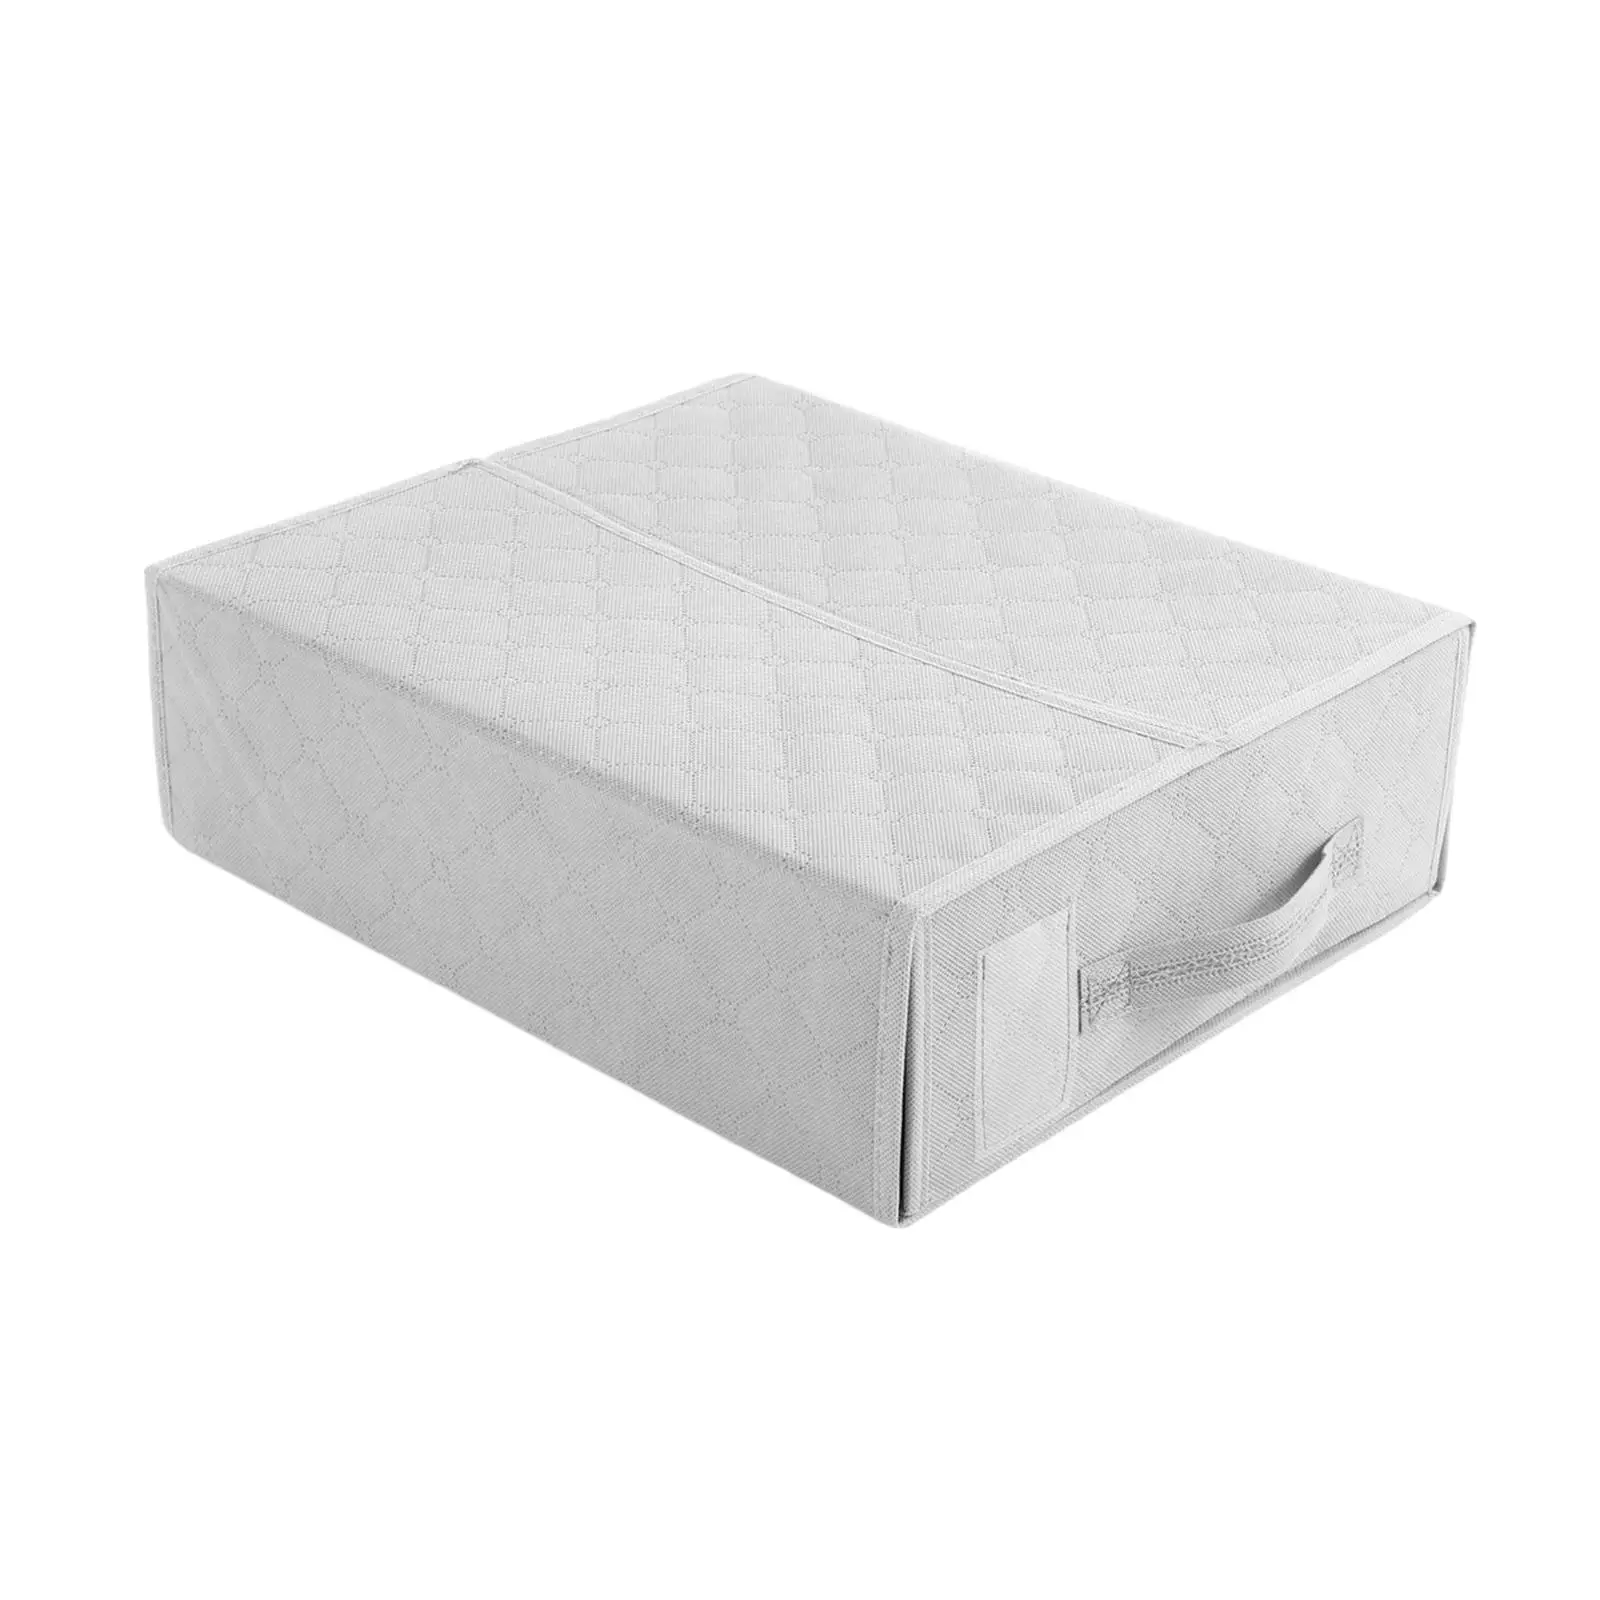 Bedding Organizer Storage Bedding Sheet Storage for Bedding Clothes Towels Queen or King Sheets Household Organization